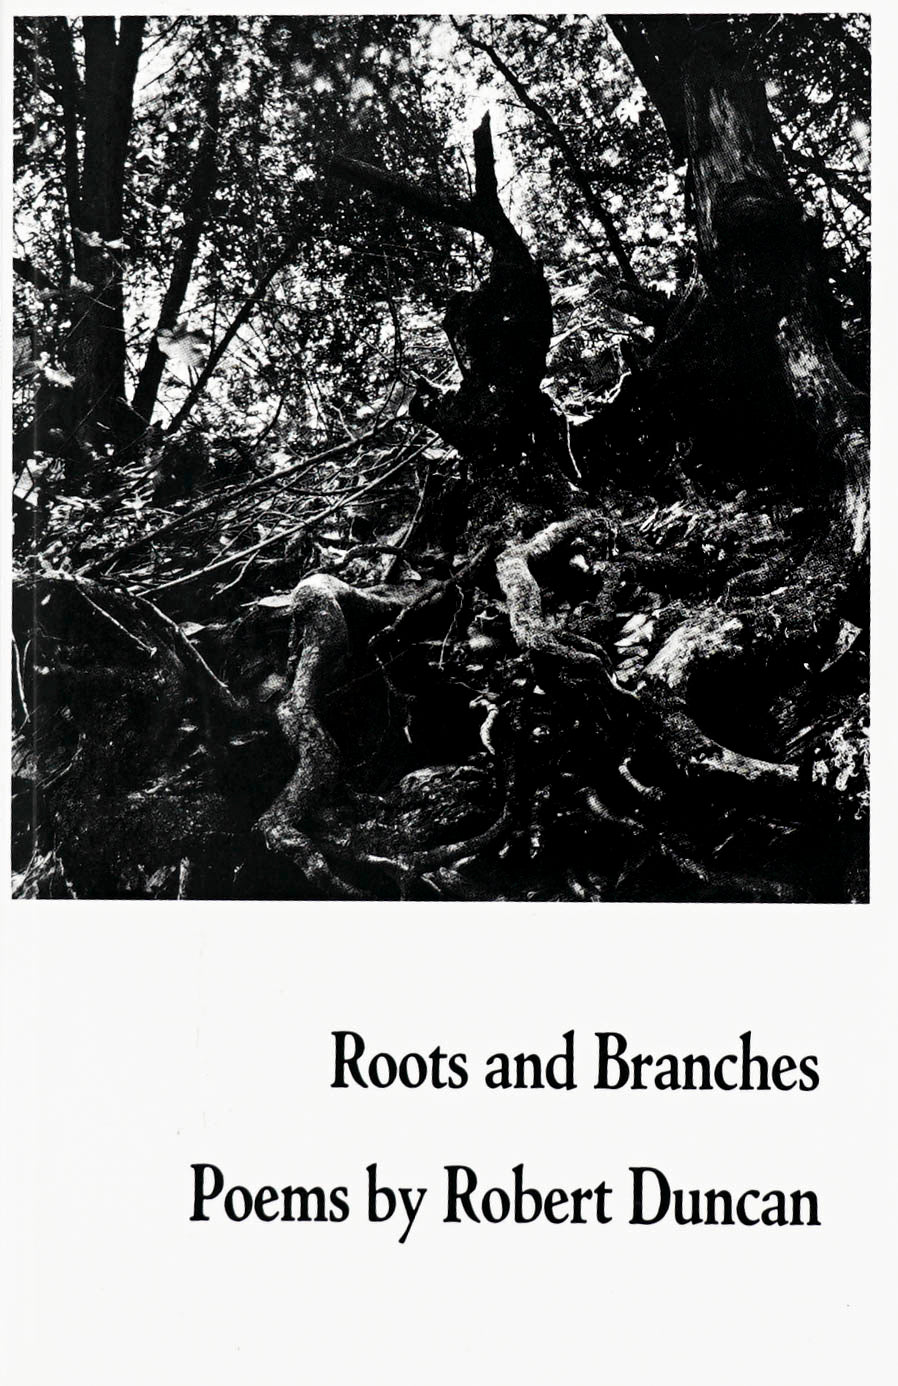 Roots and branches photographed in black and white with the words Roots and Branches Poems by Robert Duncan in black serif type